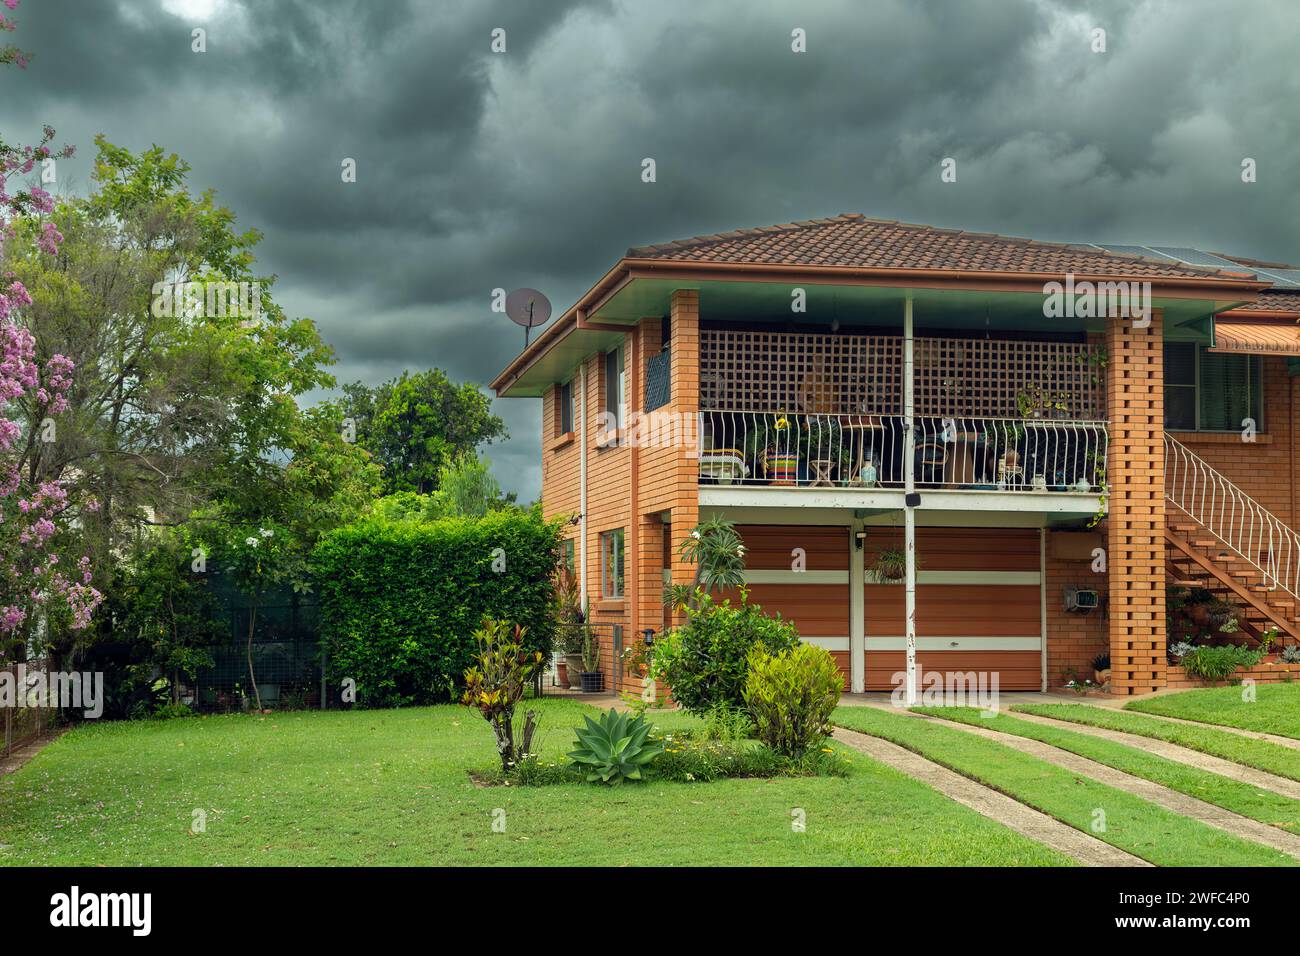 Storm clouds and a two-story brick house. Stock Photo